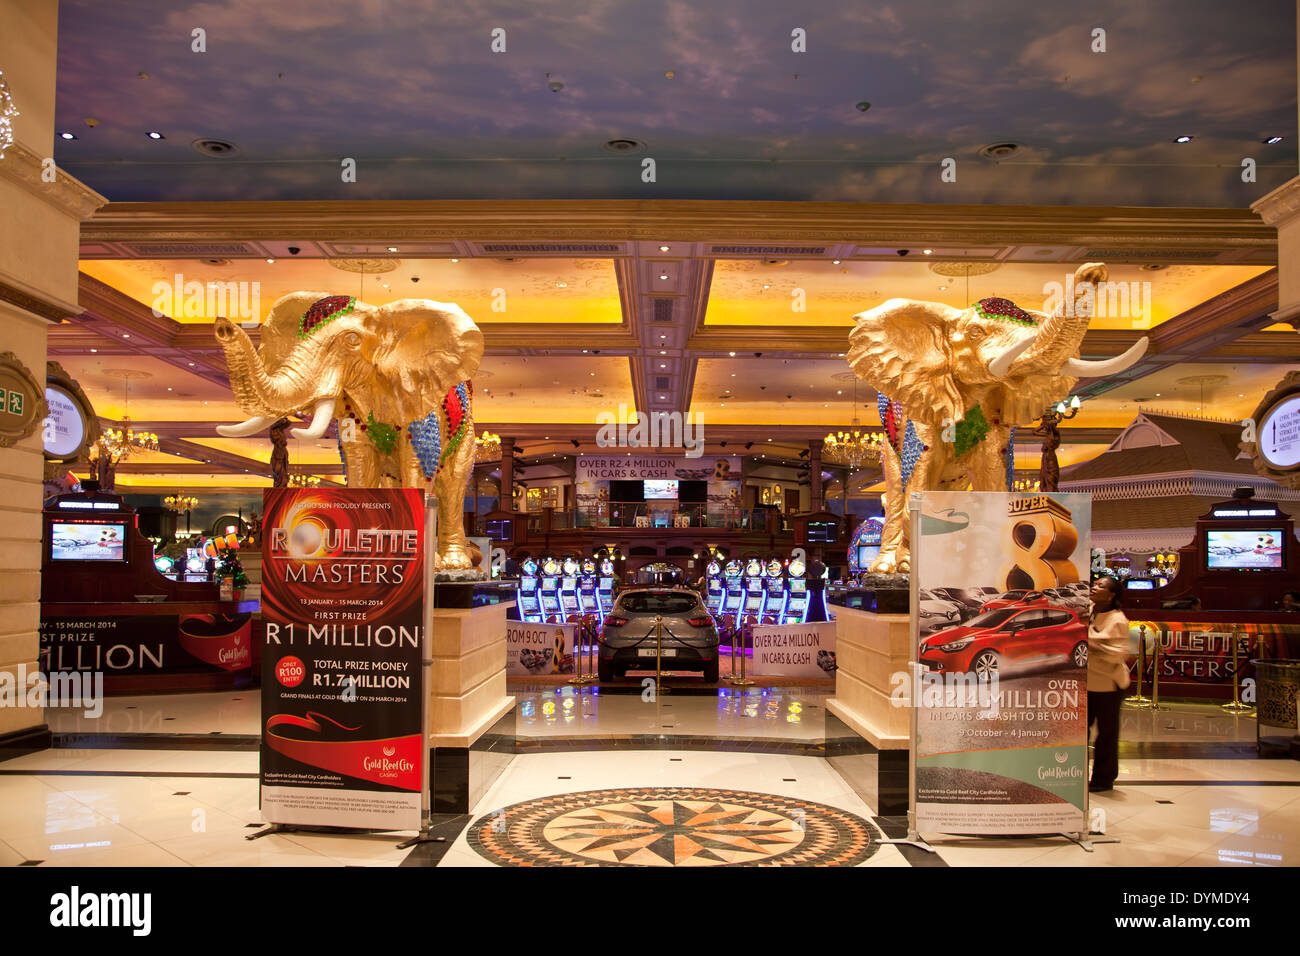 Gold Reef City Casino and Hotel Foyer in Johannesburg, Gauteng, South Africa, Africa Stock Photo